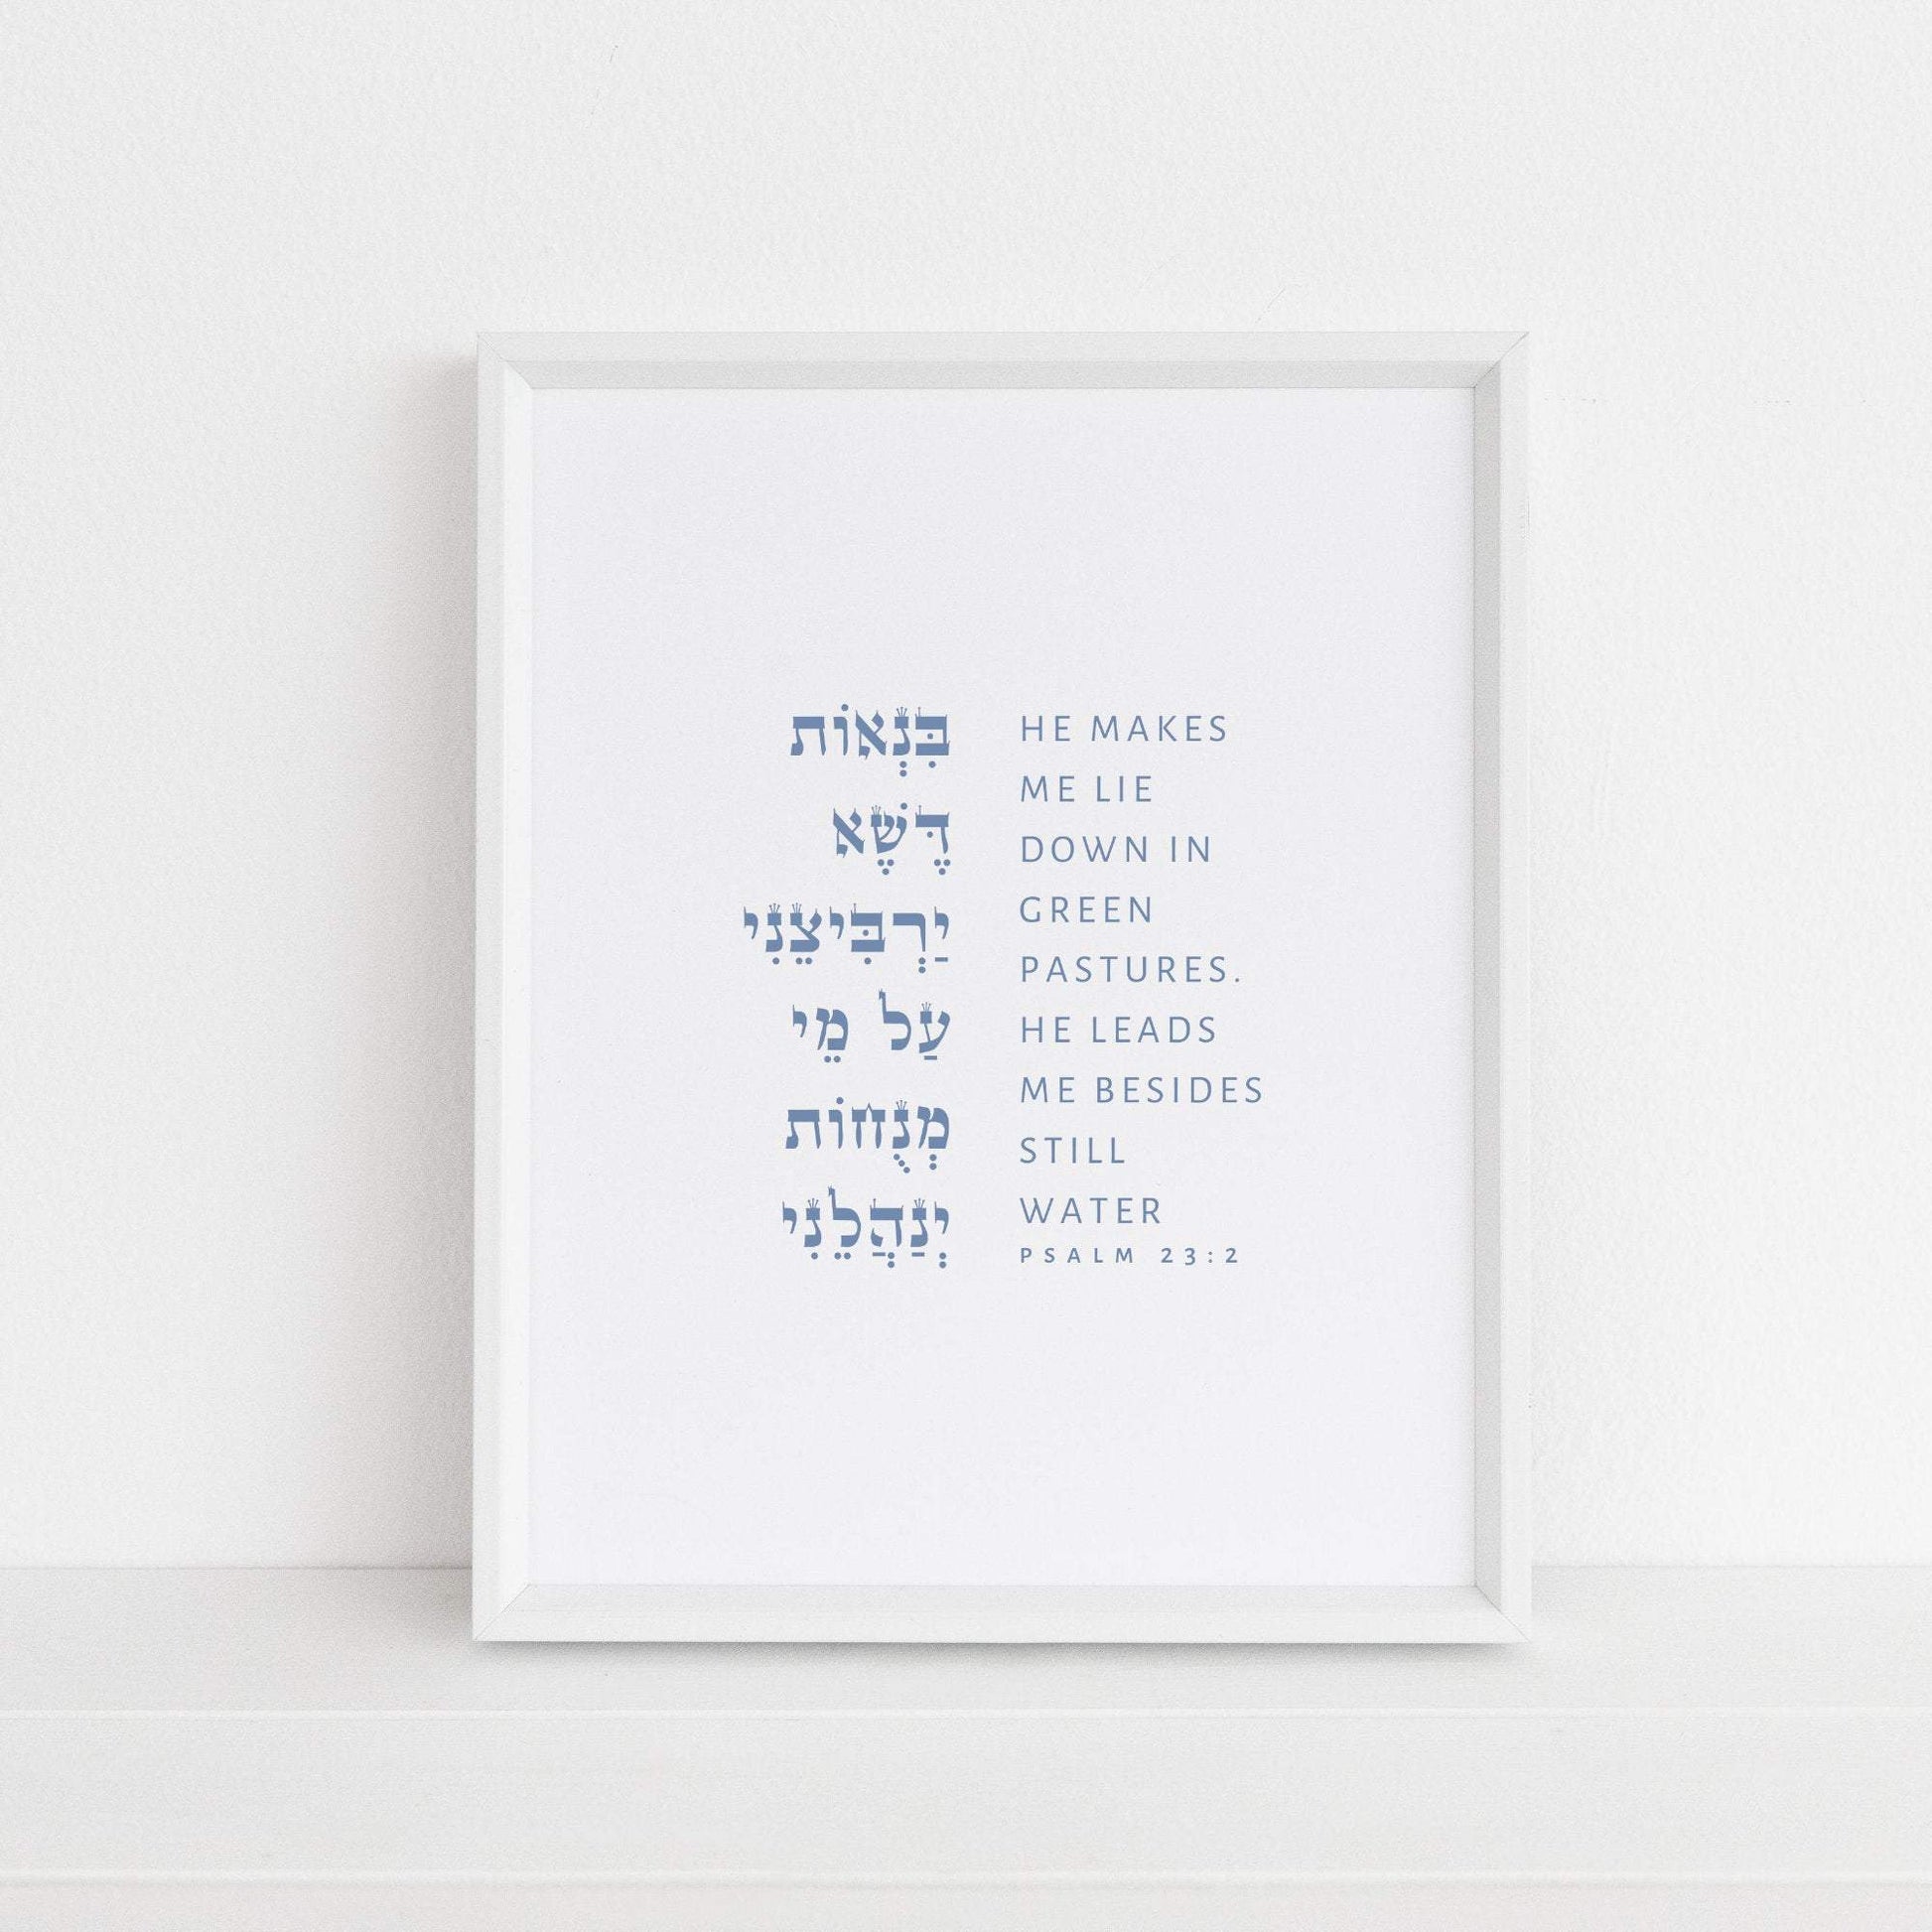 The Verse Psalm 23:2 "He leads me besides still water" Psalm 23:2 | Jewish Psalms Prints | He leads me beside still waters